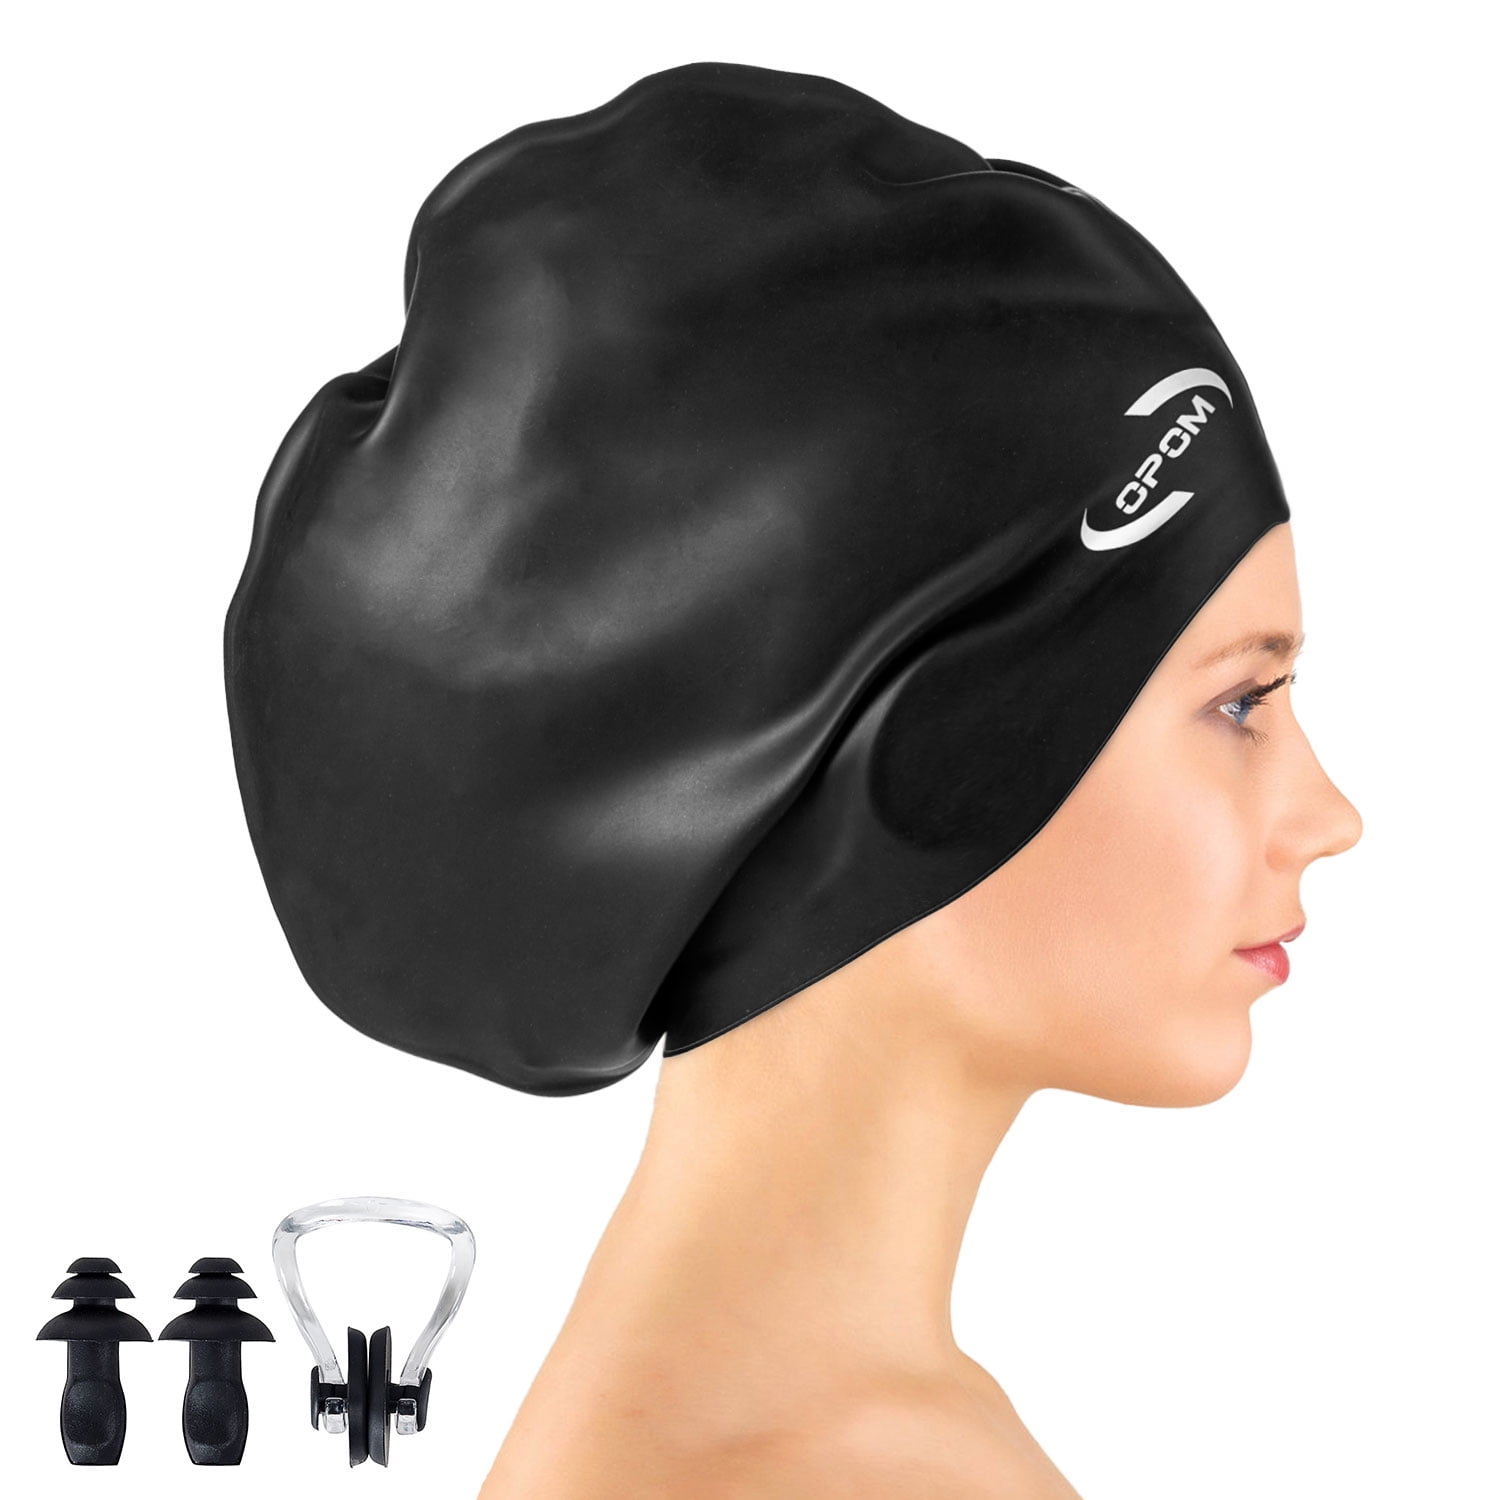 High Elasticity Thick Silicone Swim Cap for Long Hair Keep Your Hair Dry OPOM Swim Caps for Women and Men Unisex Adults Bathing Swimming Cap with Ear Plugs and Nose Clip 